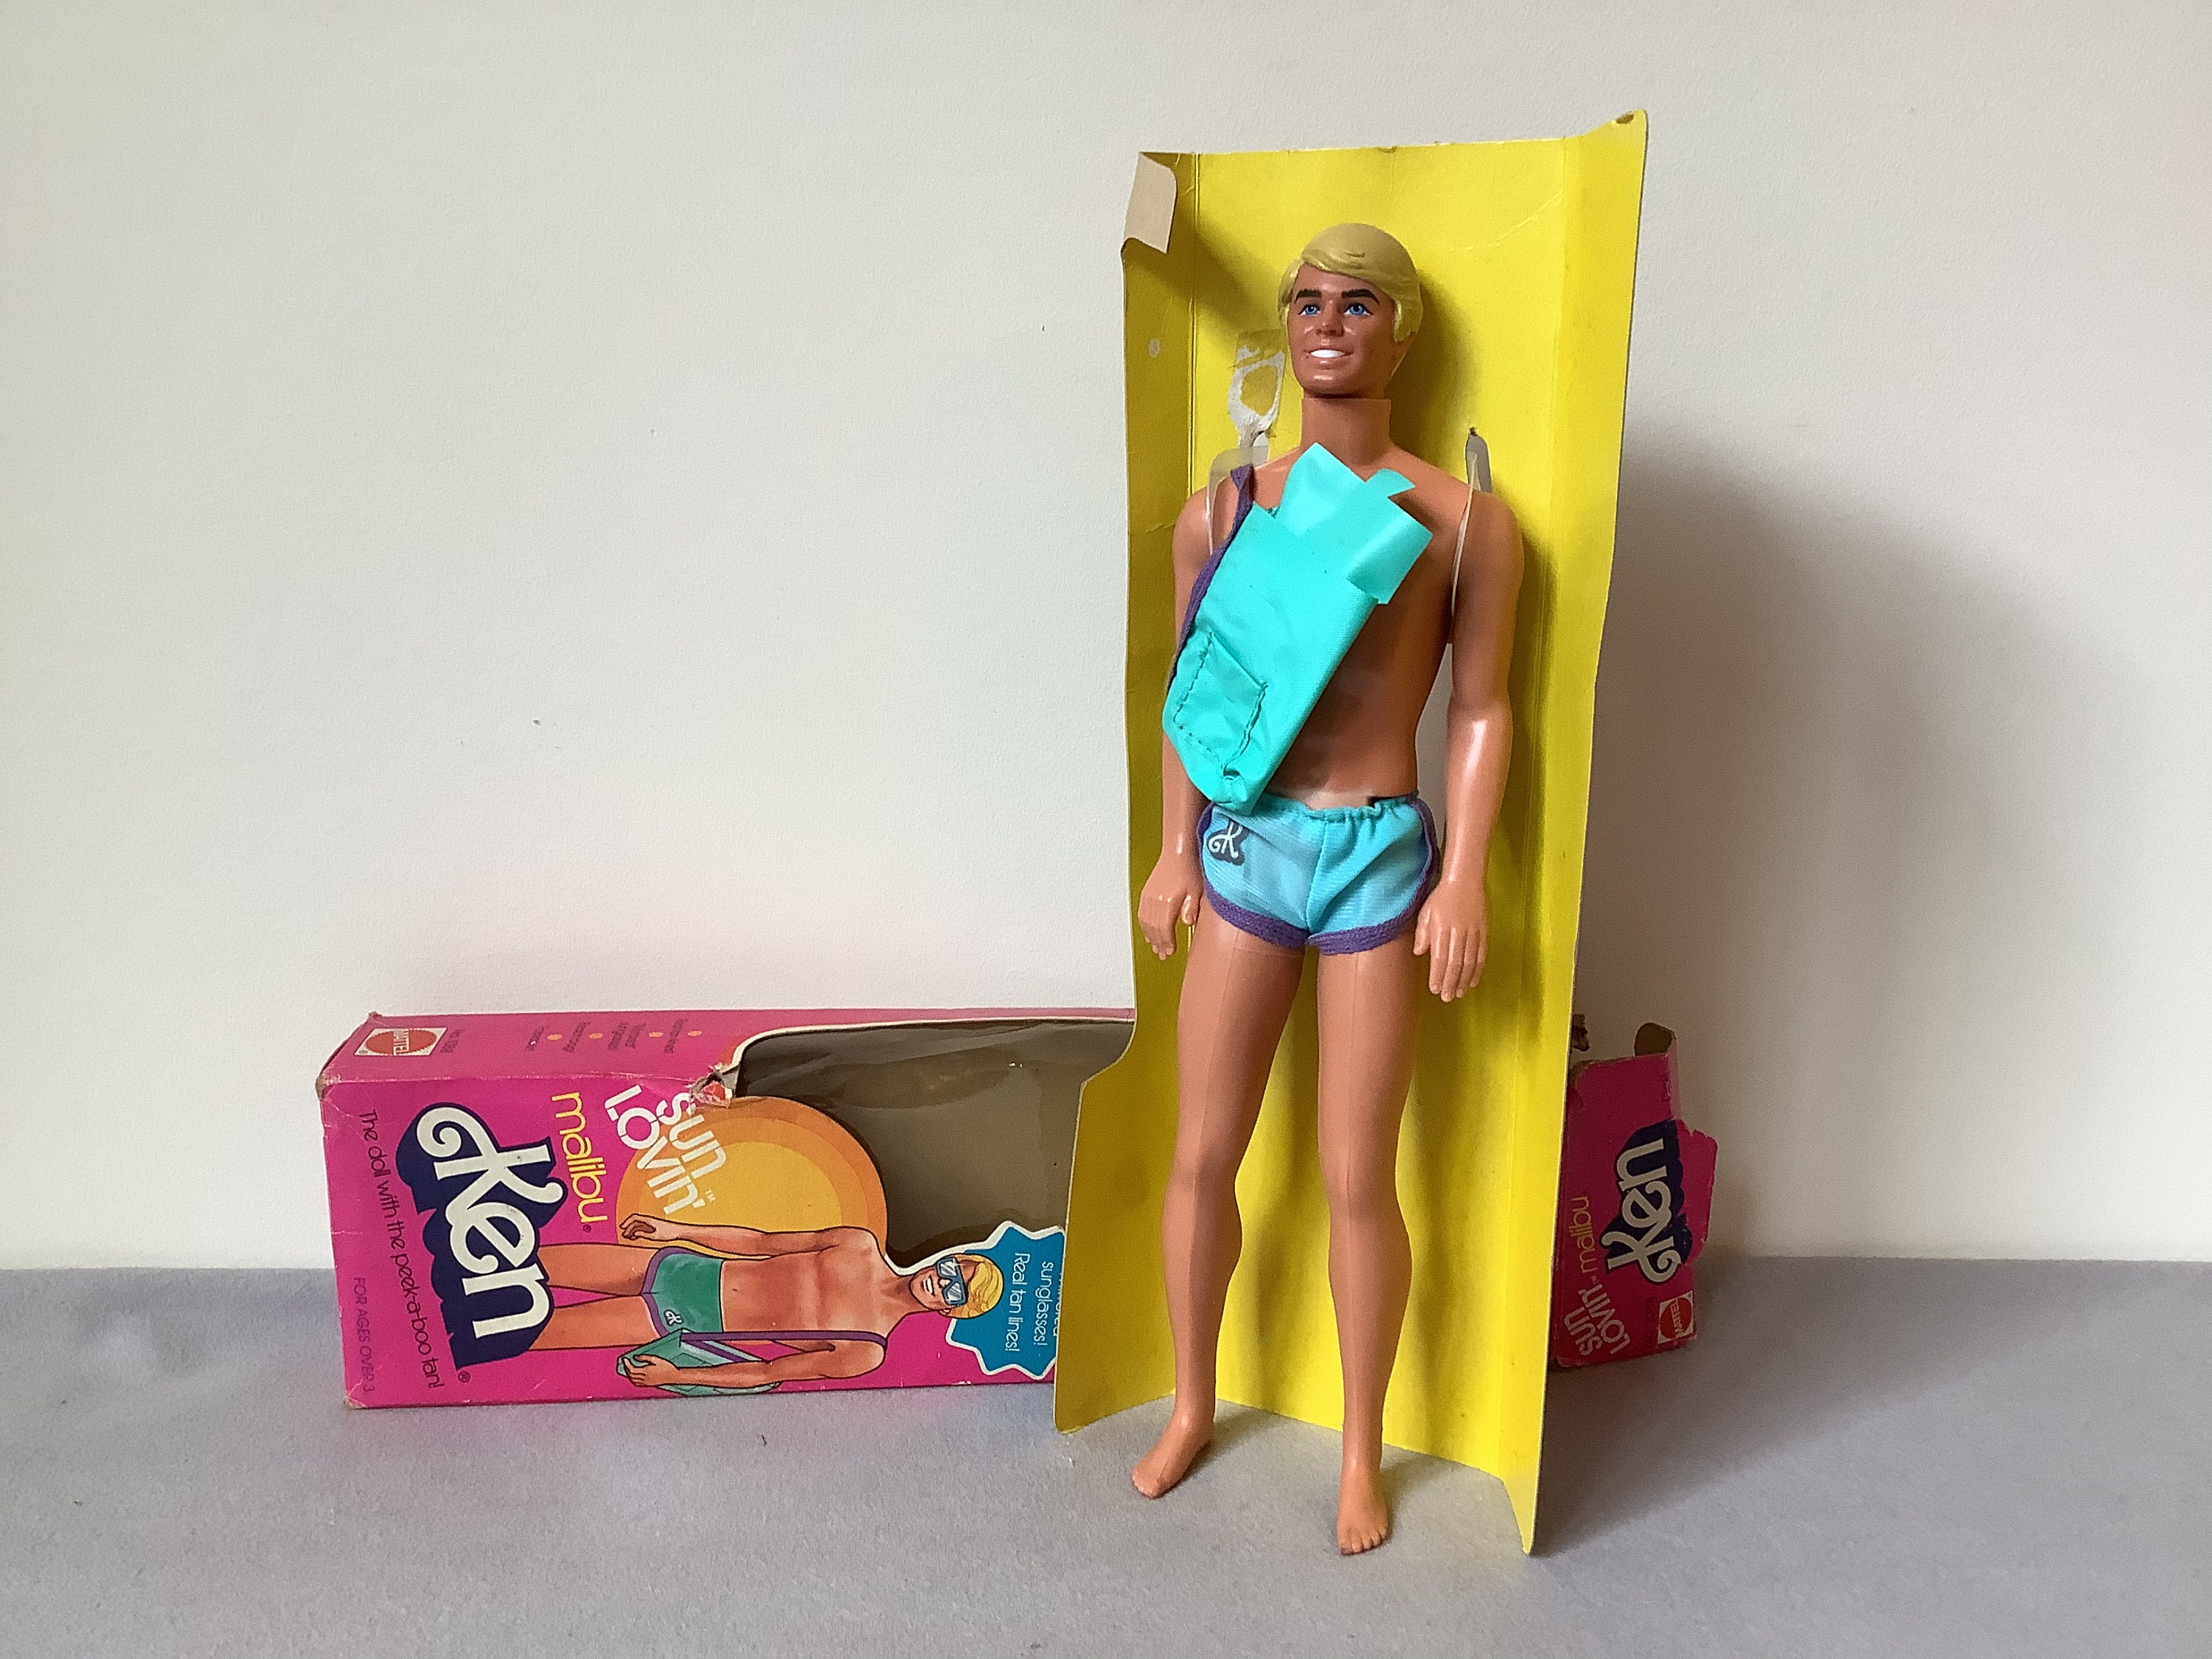 Barbie Fashions Ken Doll Clothes, Set with Malibu Tee, Shorts & Accessory (1 Outfit)